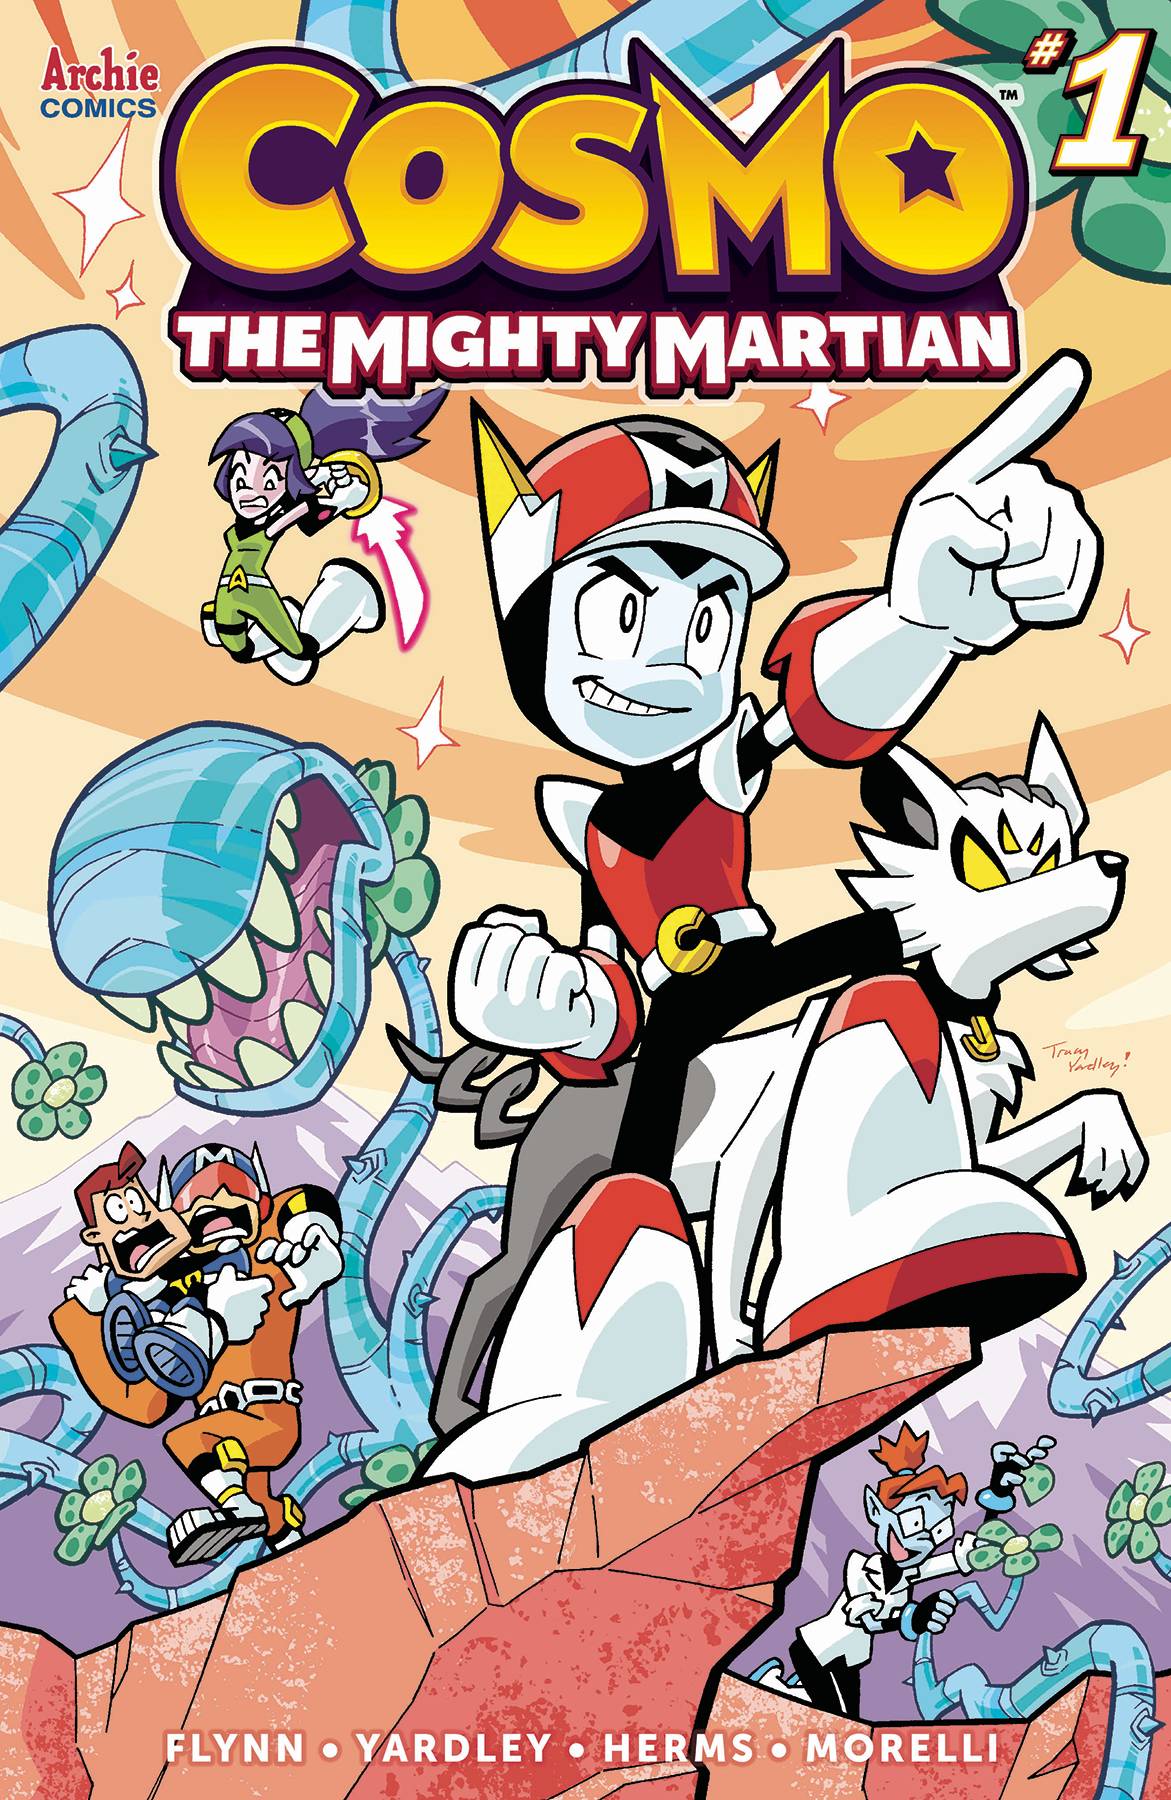 Cosmo: The Mighty Martian #1 (2019)